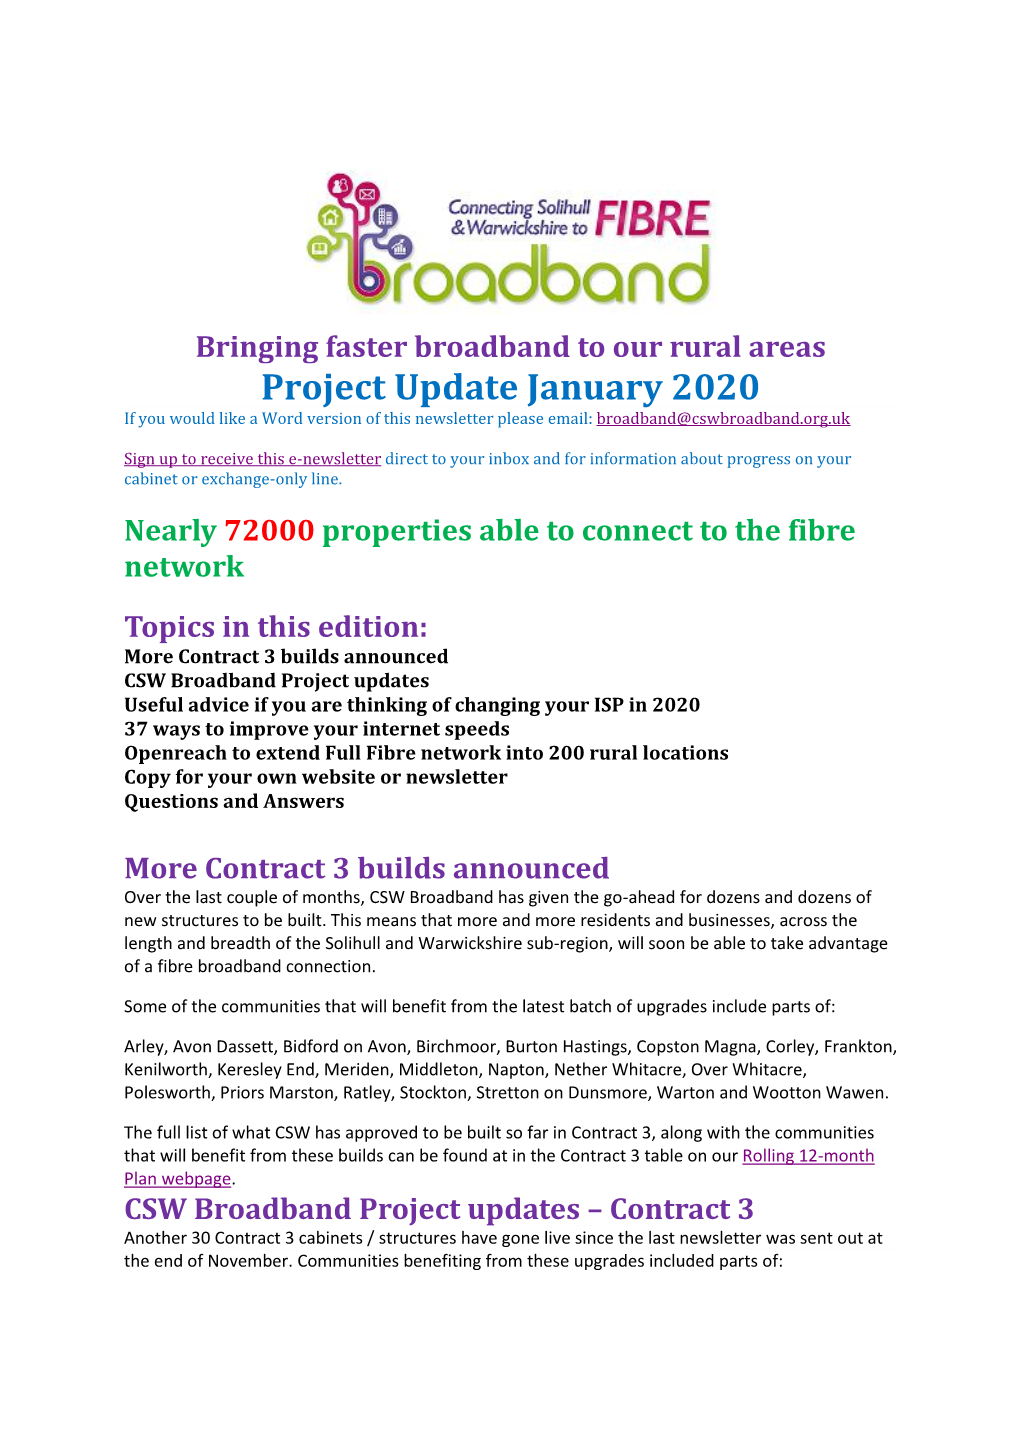 Project Update January 2020 If You Would Like a Word Version of This Newsletter Please Email: Broadband@Cswbroadband.Org.Uk